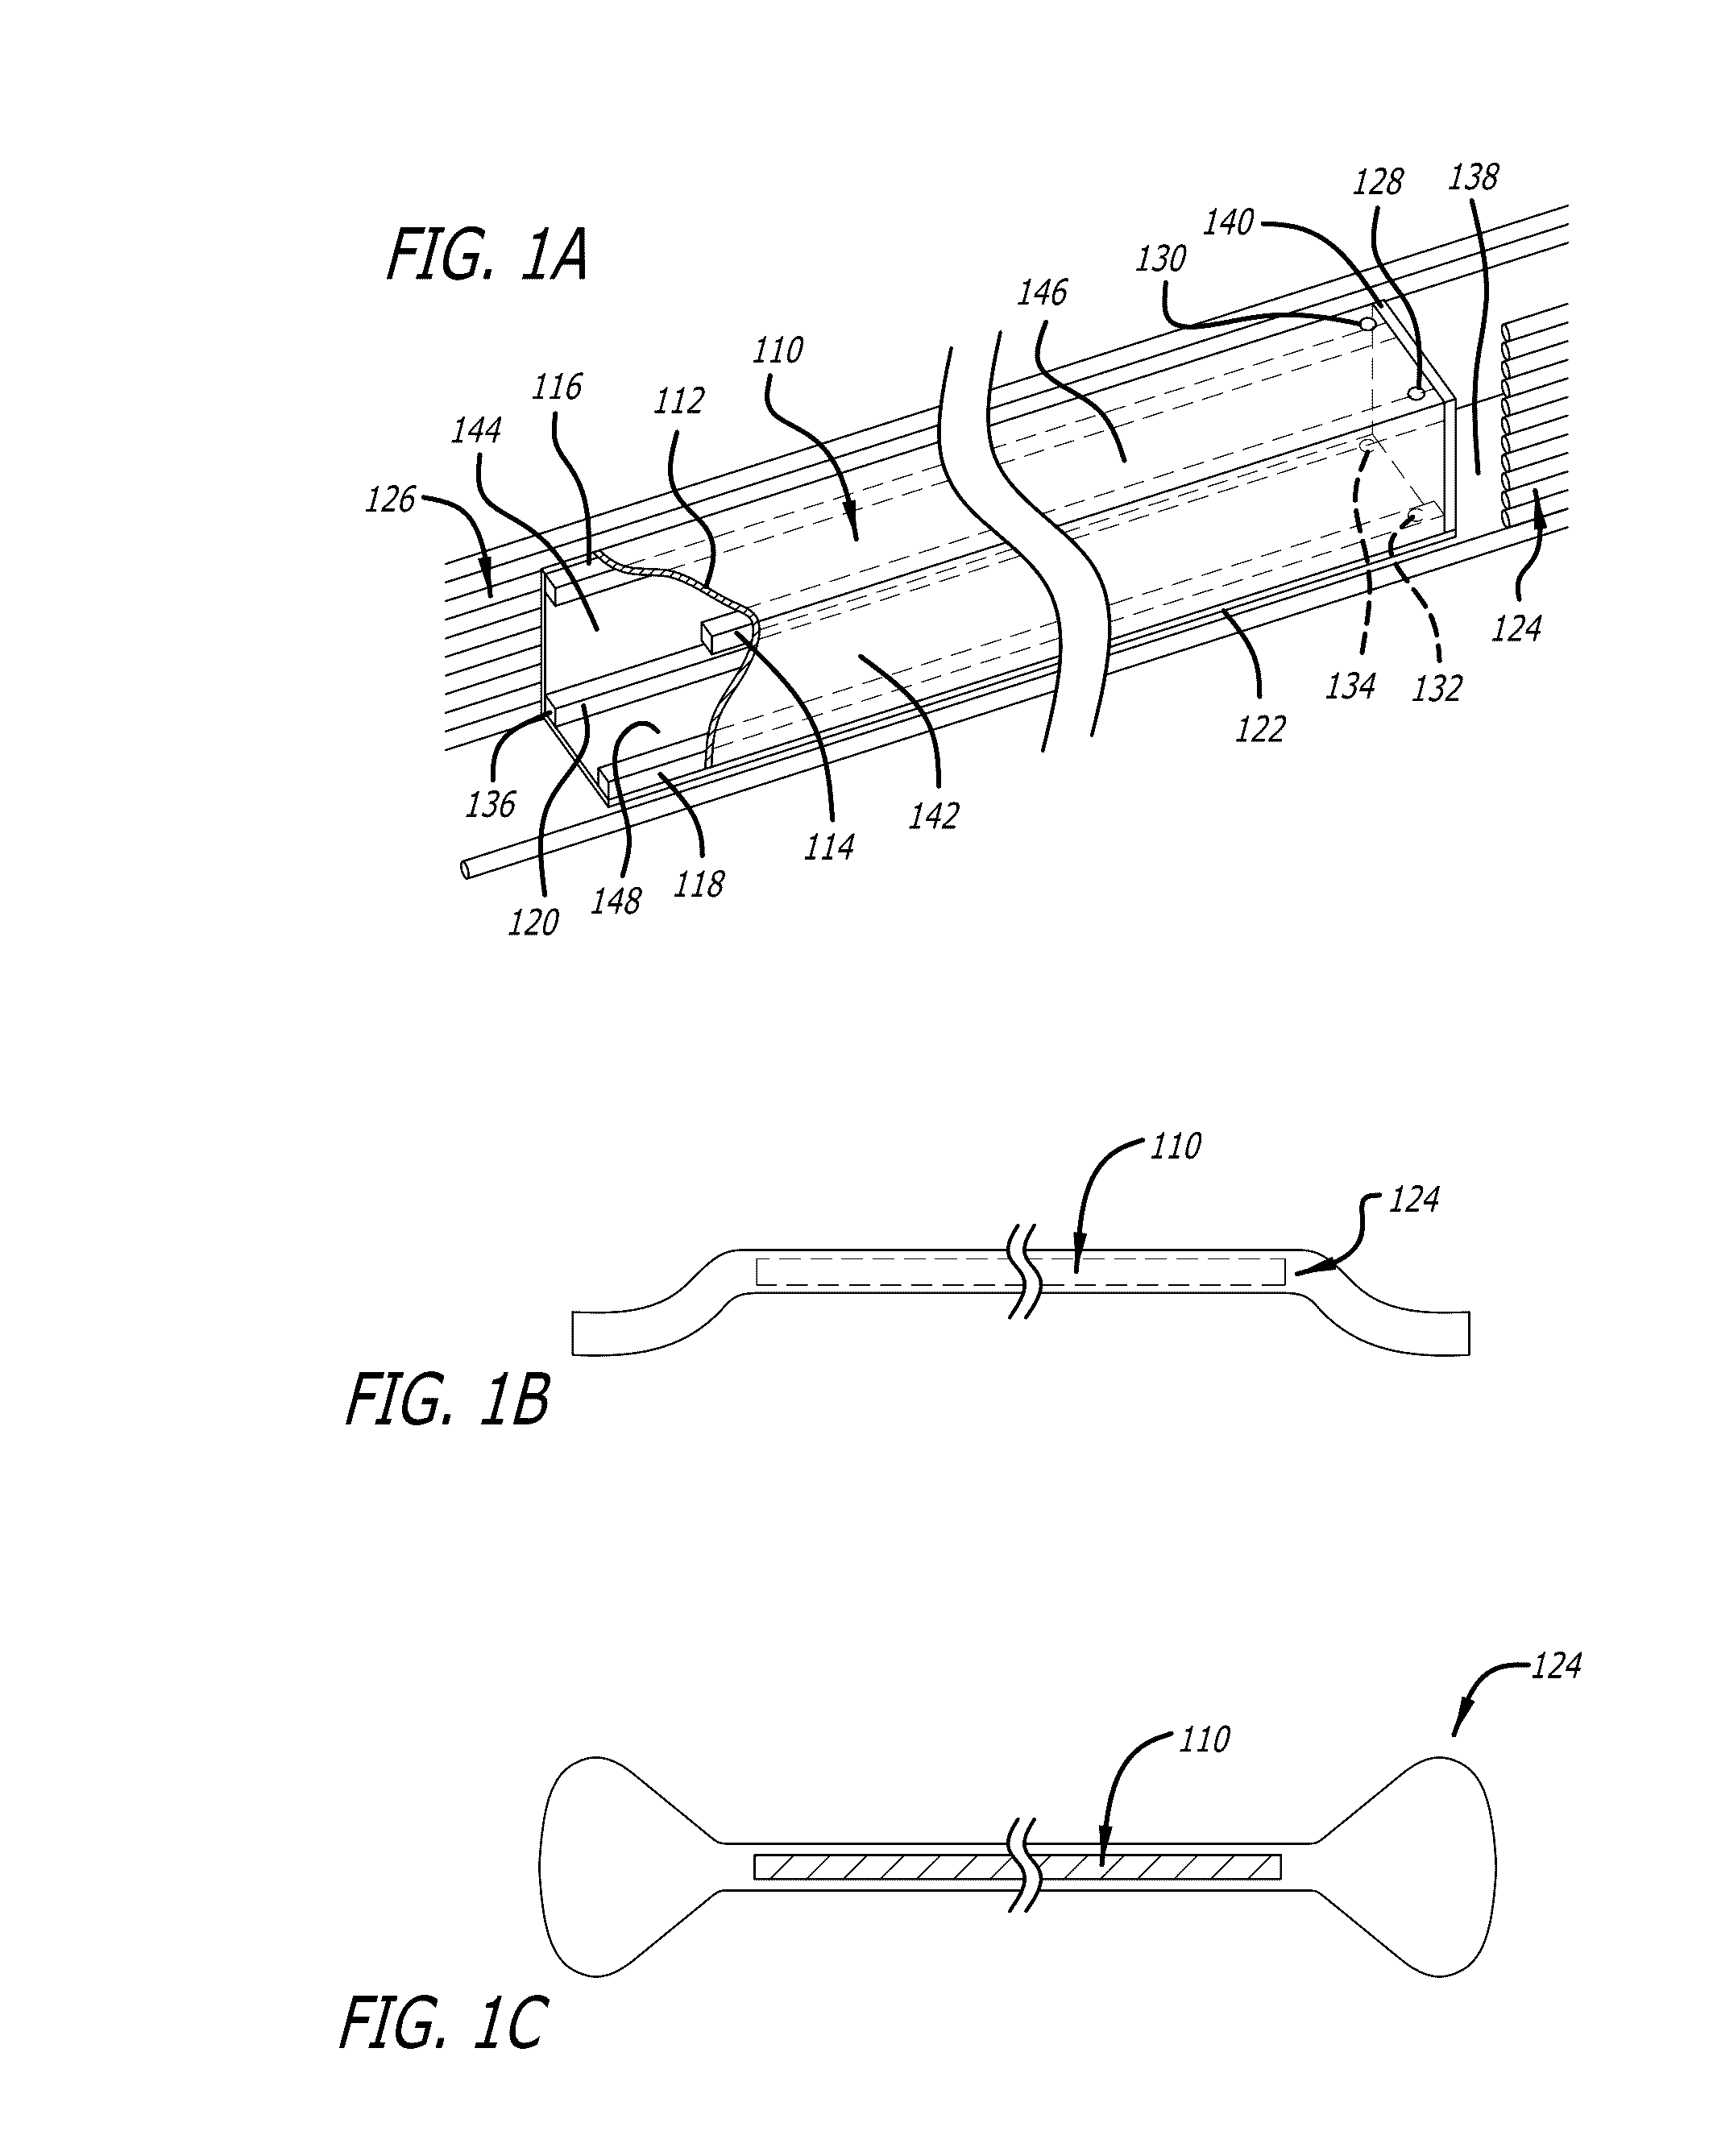 System and method for magnetically launching projectiles or spacecraft